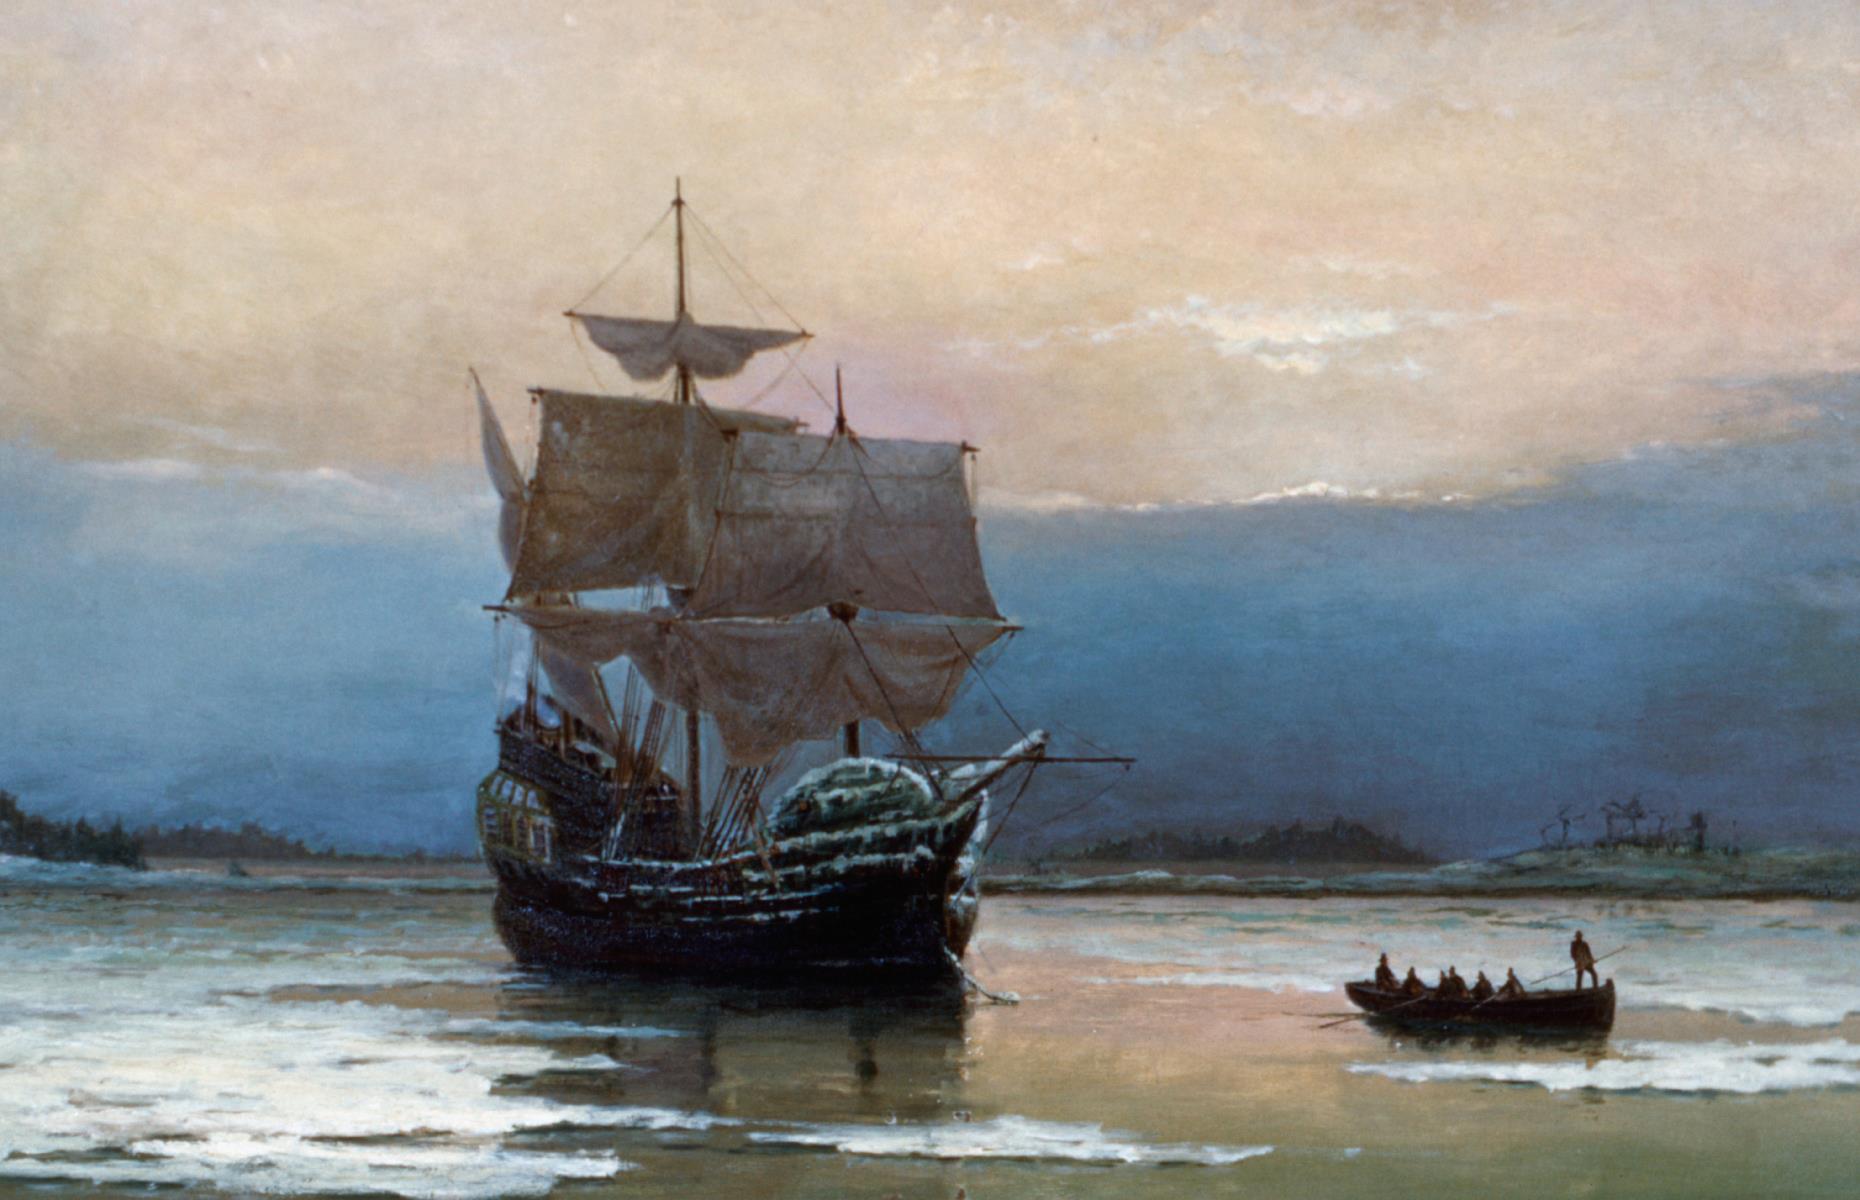 In August 1620, the Mayflower and the Speedwell ships finally set out from Southampton – but this initial journey was short lived. Soon after the ships embarked on their voyage, the Speedwell sprang a leak and both vessels were forced to turn around and head to the port at Plymouth. It was this turn of fate that would cement the Mayflower’s place in history. The famous ship is depicted here at sea.